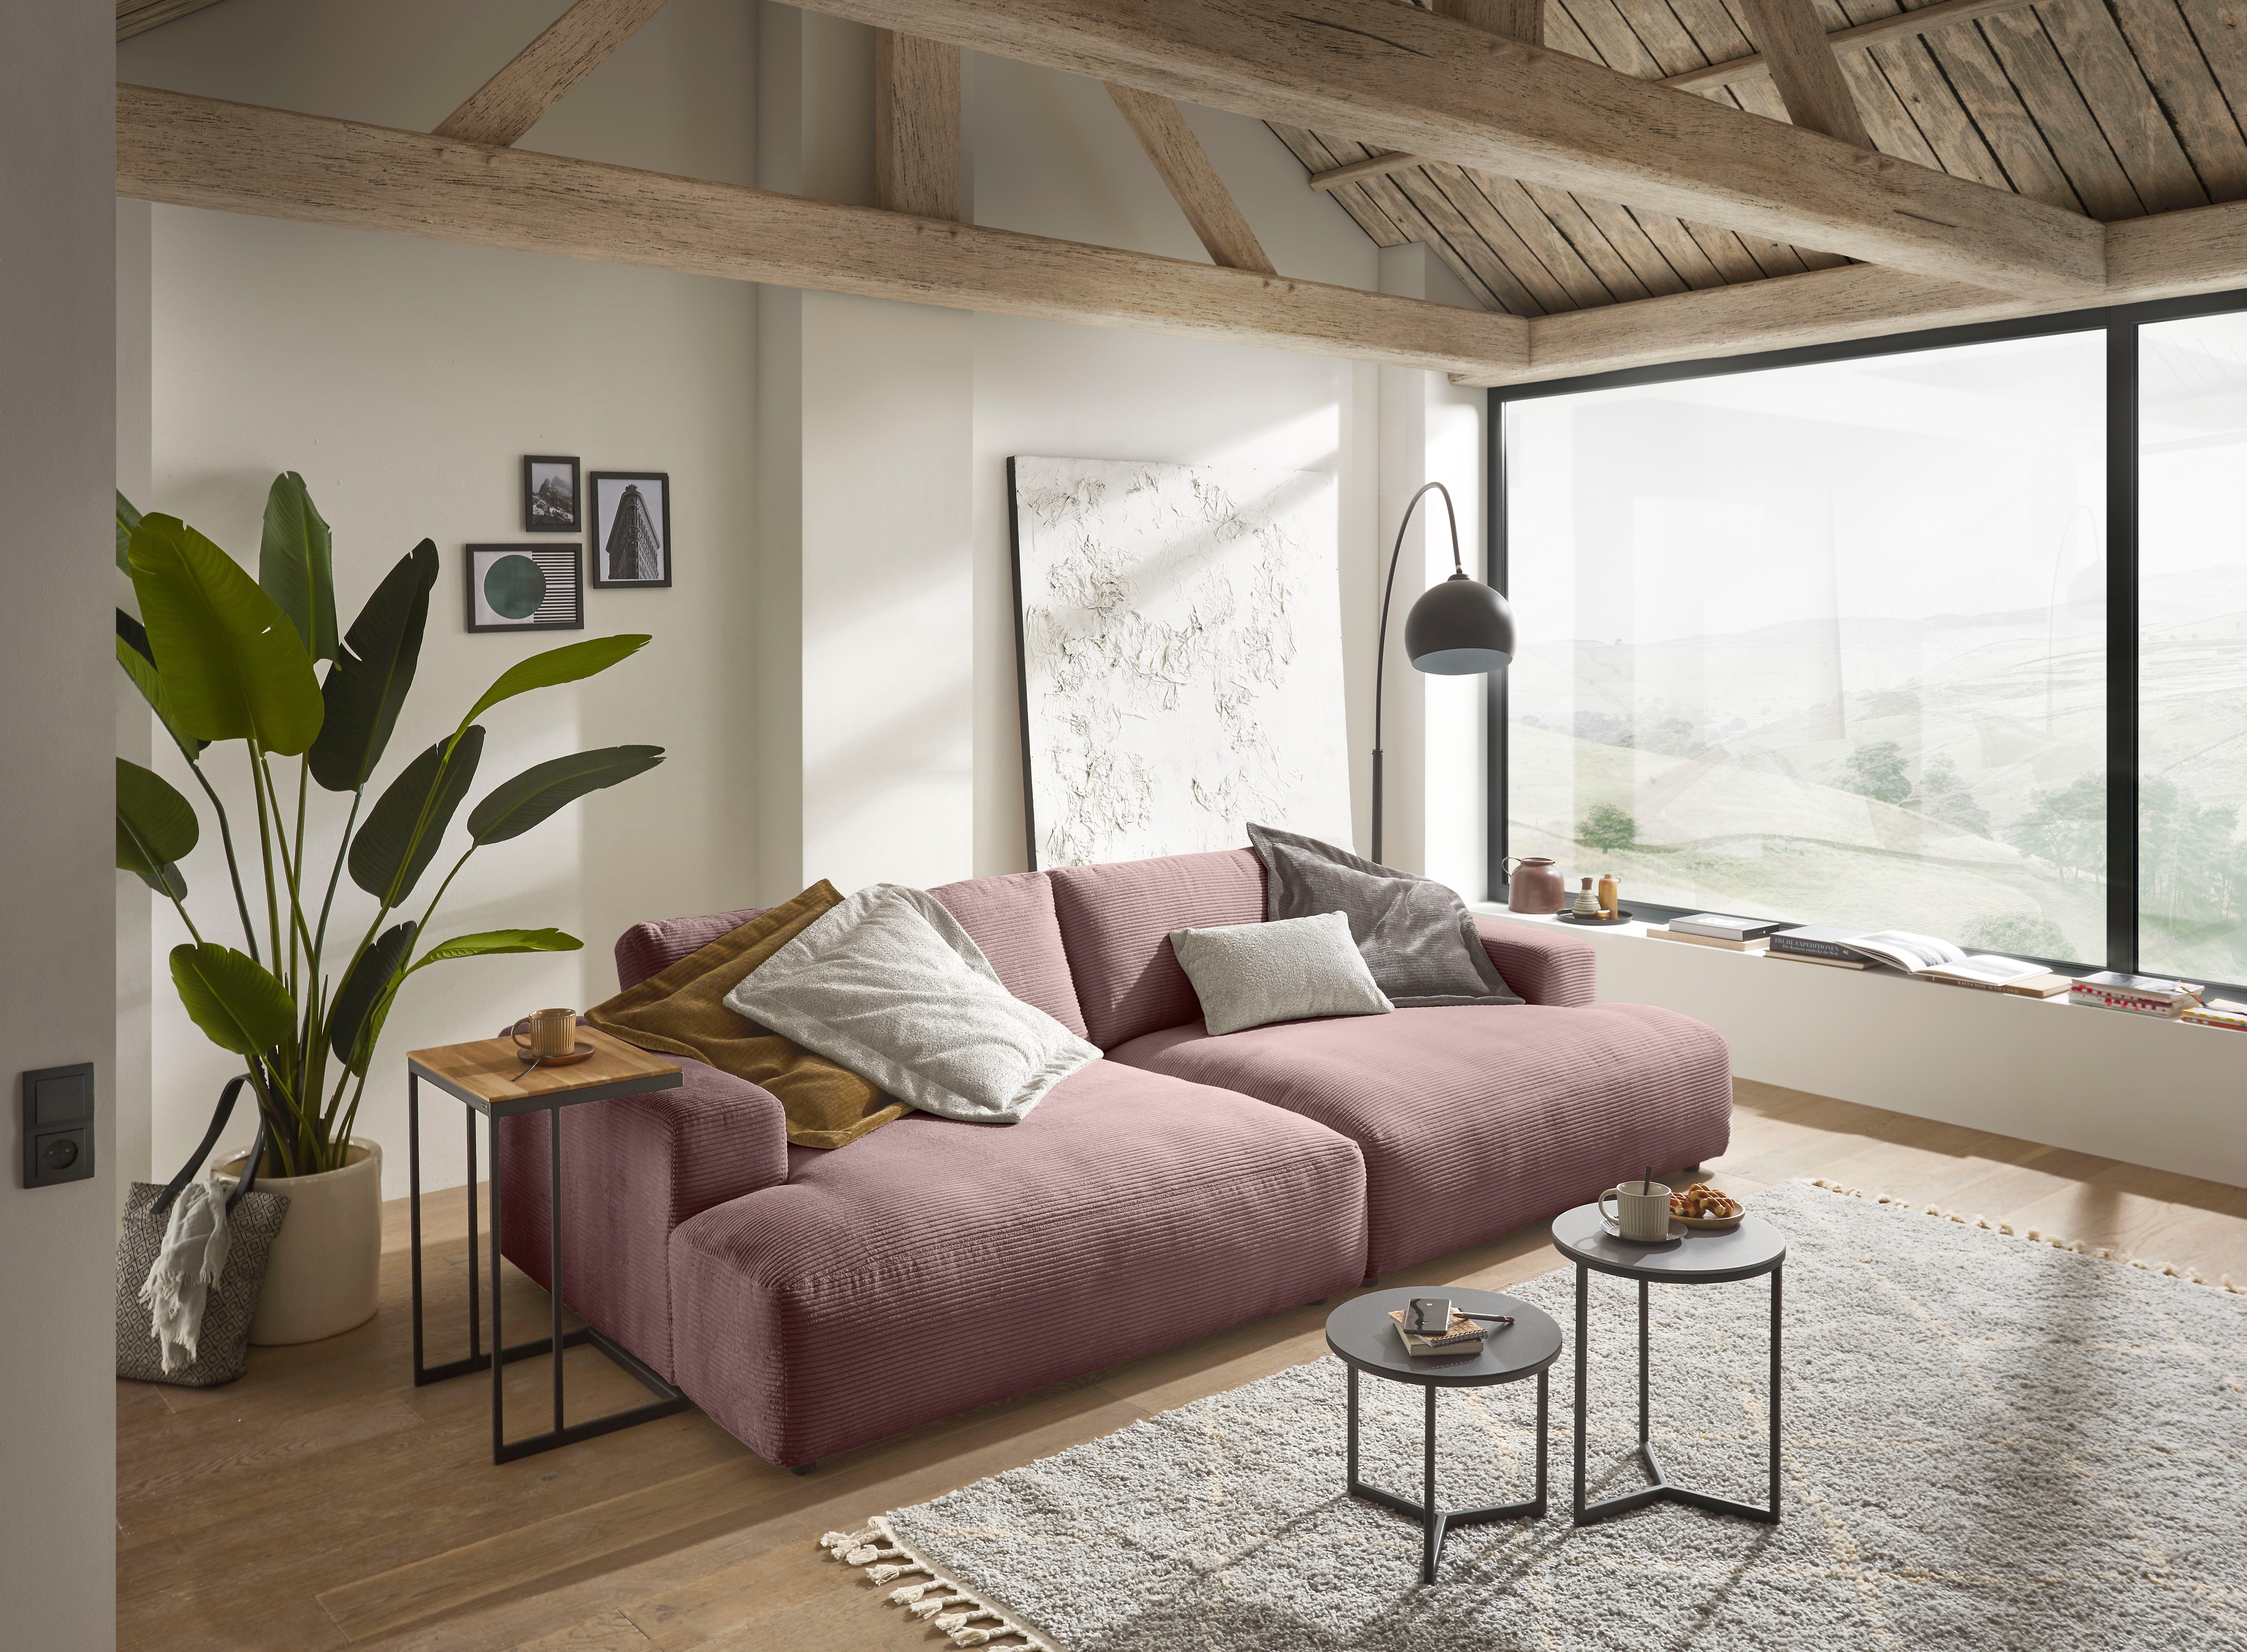 GALLERY M Breite Cord-Bezug, branded Loungesofa Musterring 292 Lucia, rosa by cm